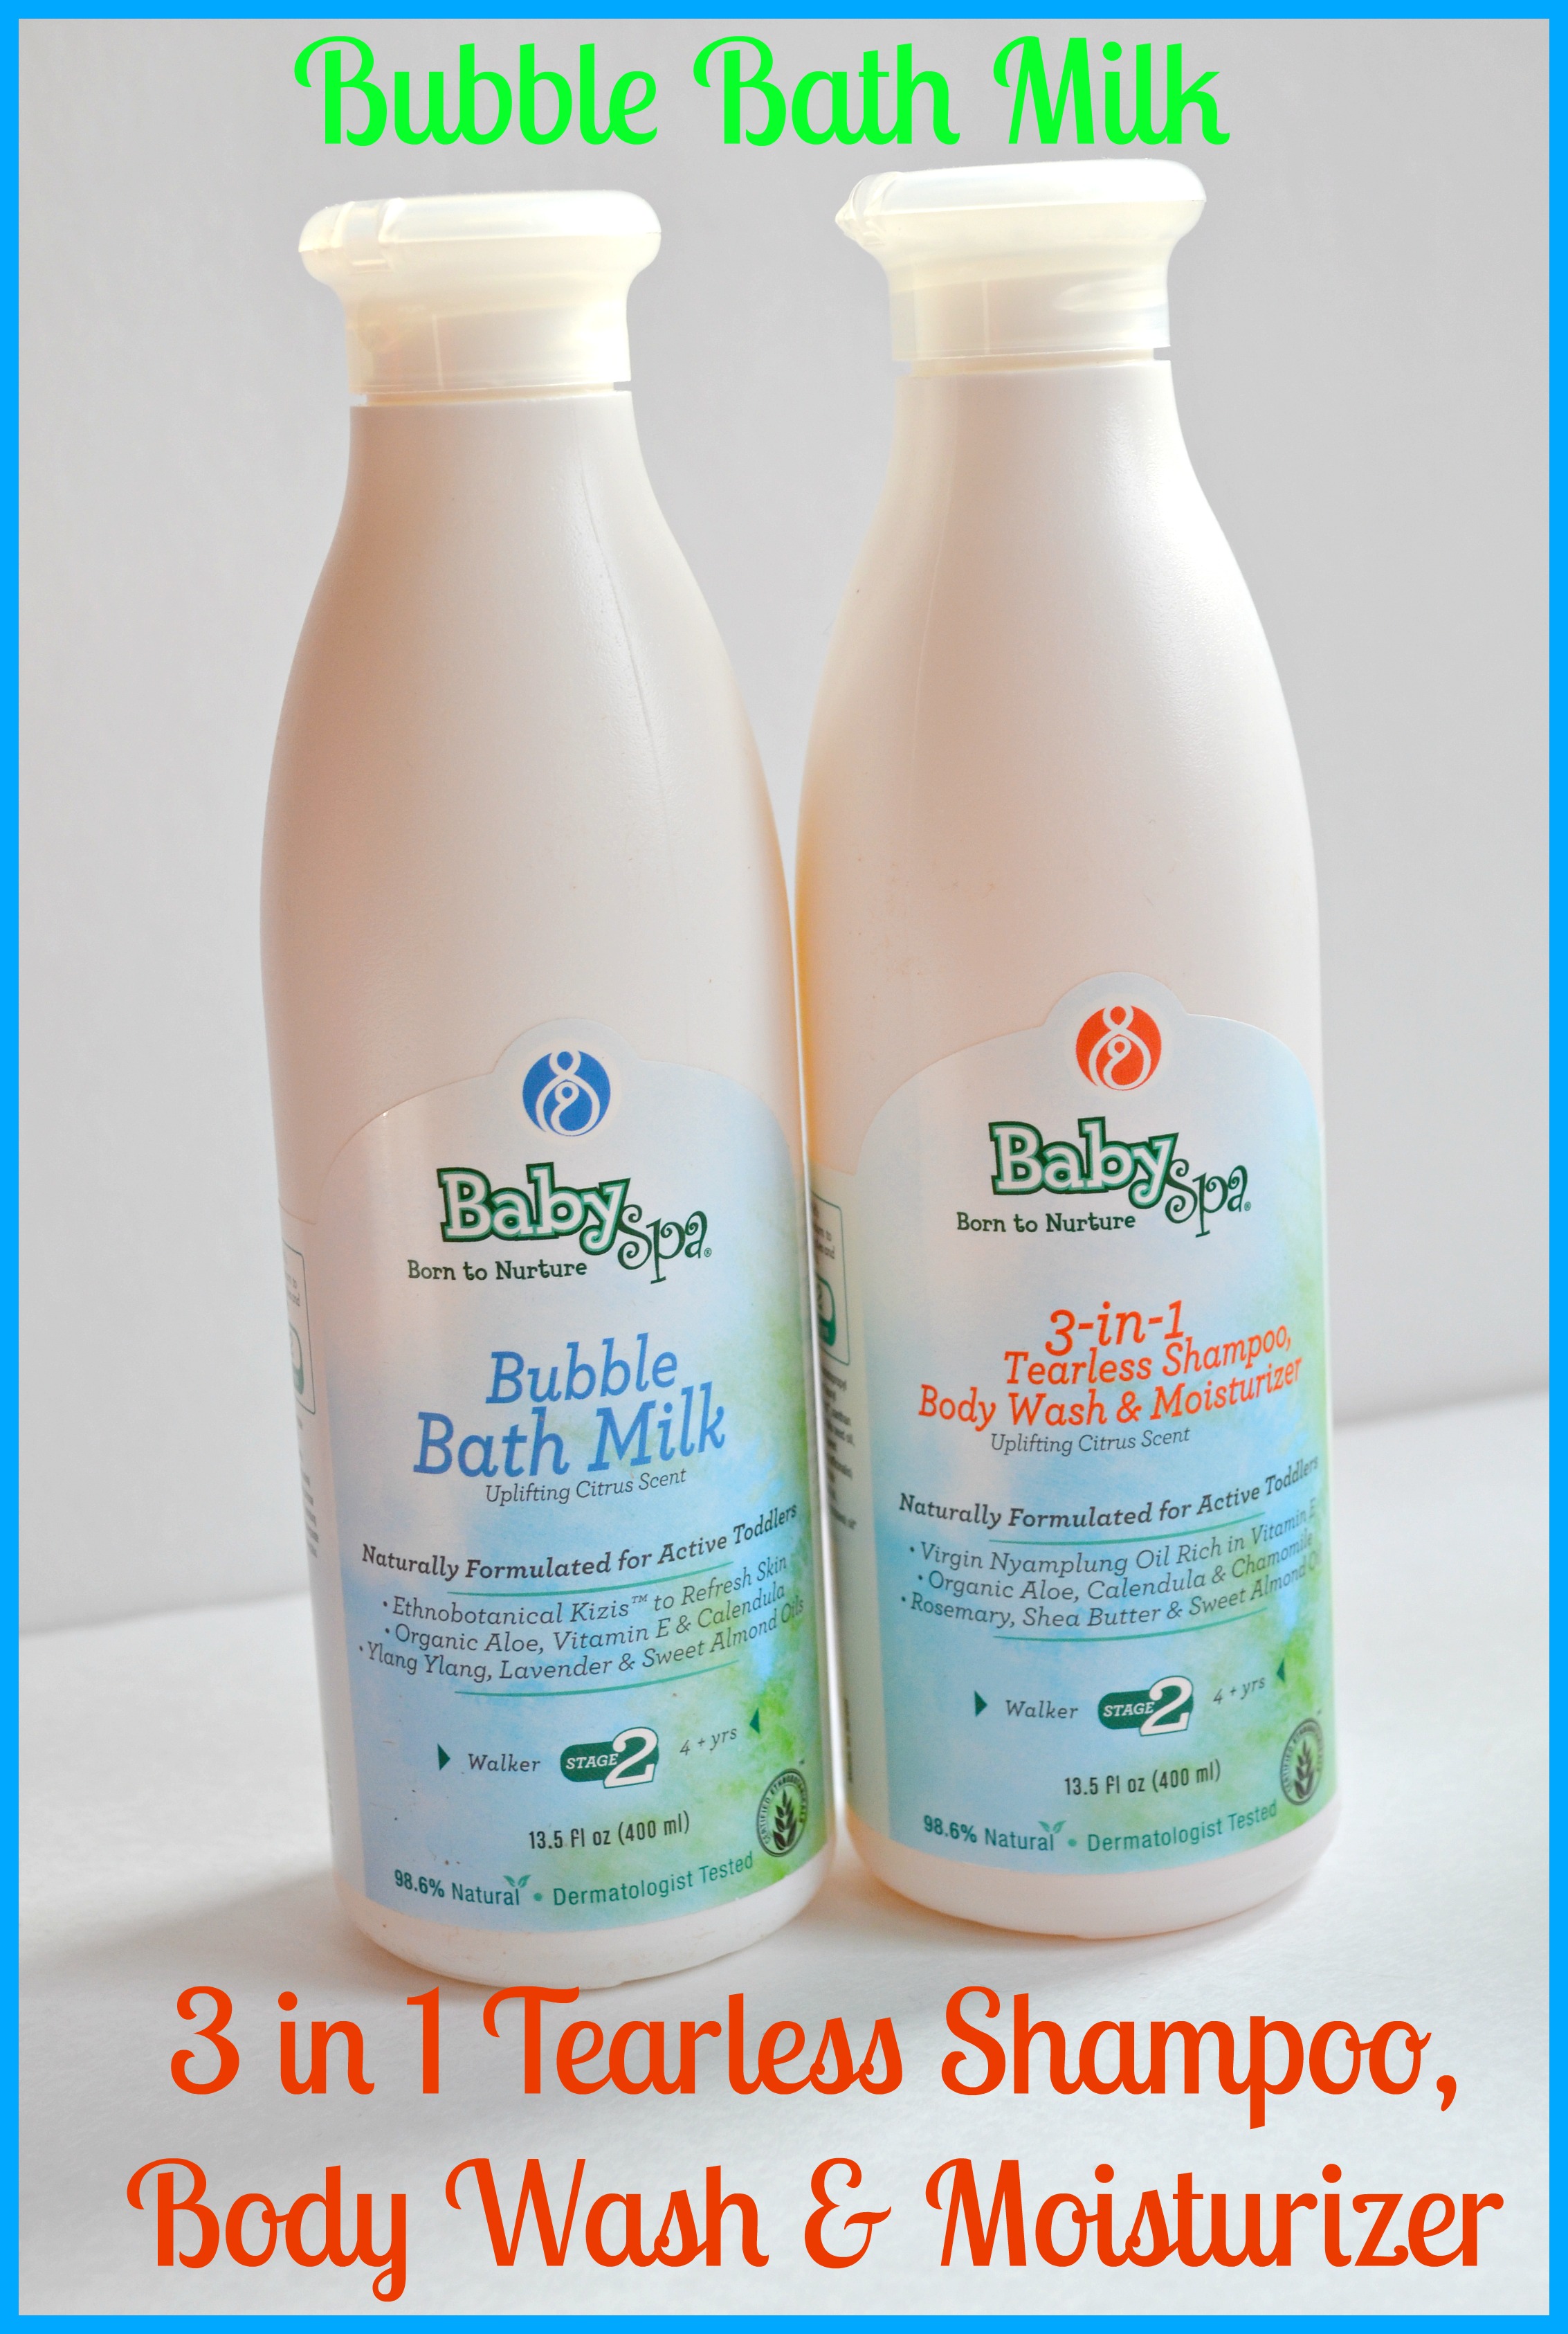 BabySpa USA Offers Organic & Earth Friendly Products